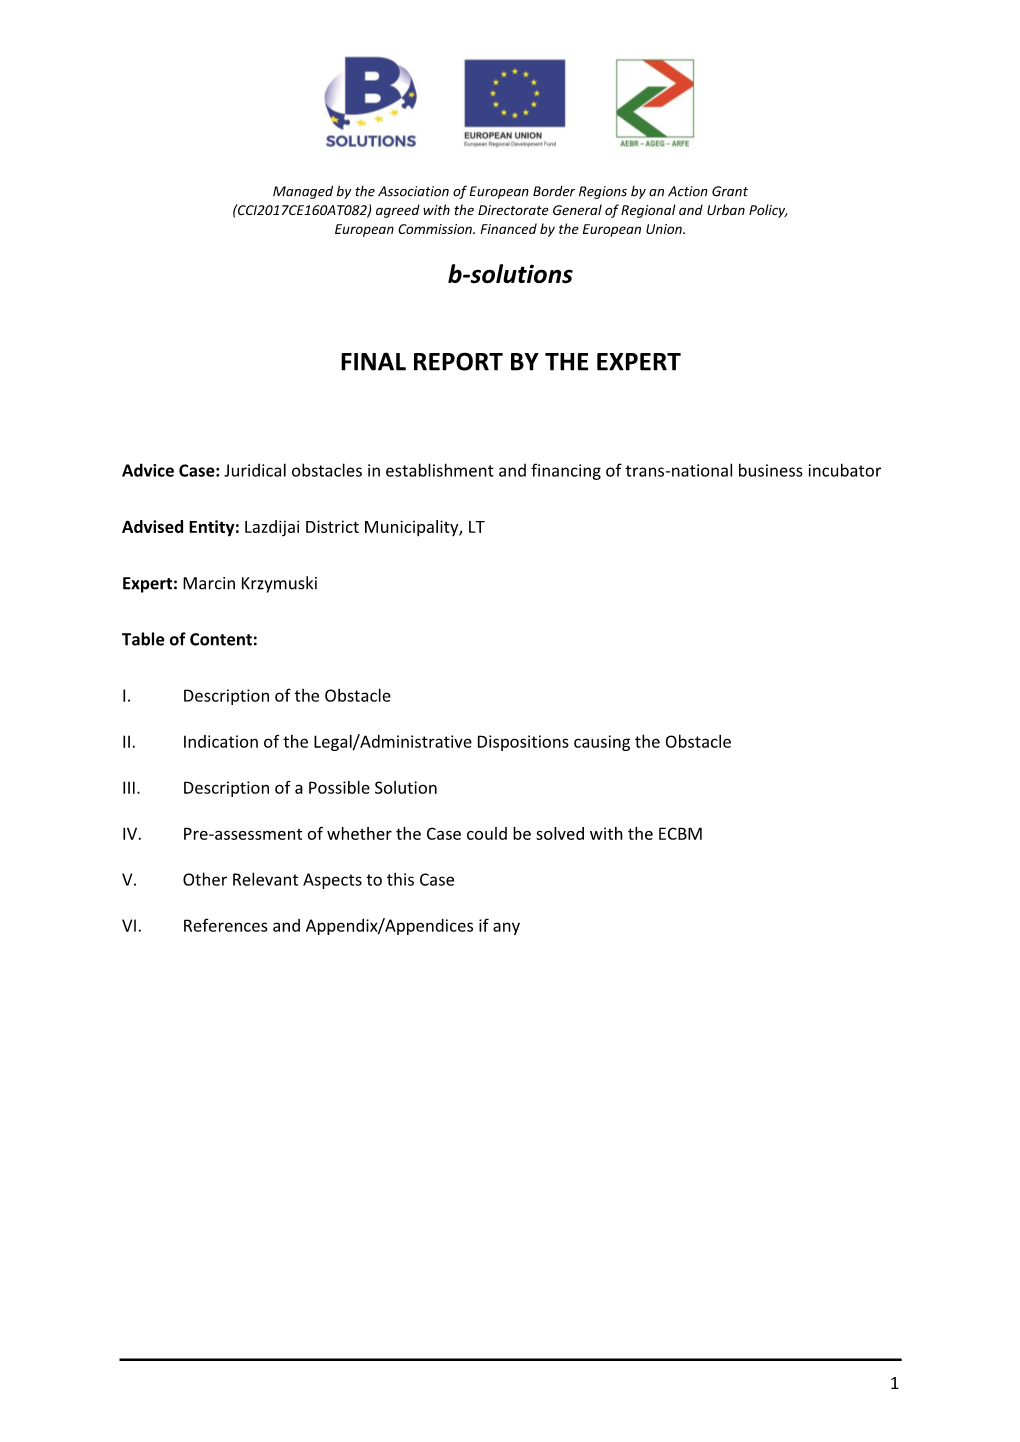 B-Solutions FINAL REPORT by the EXPERT